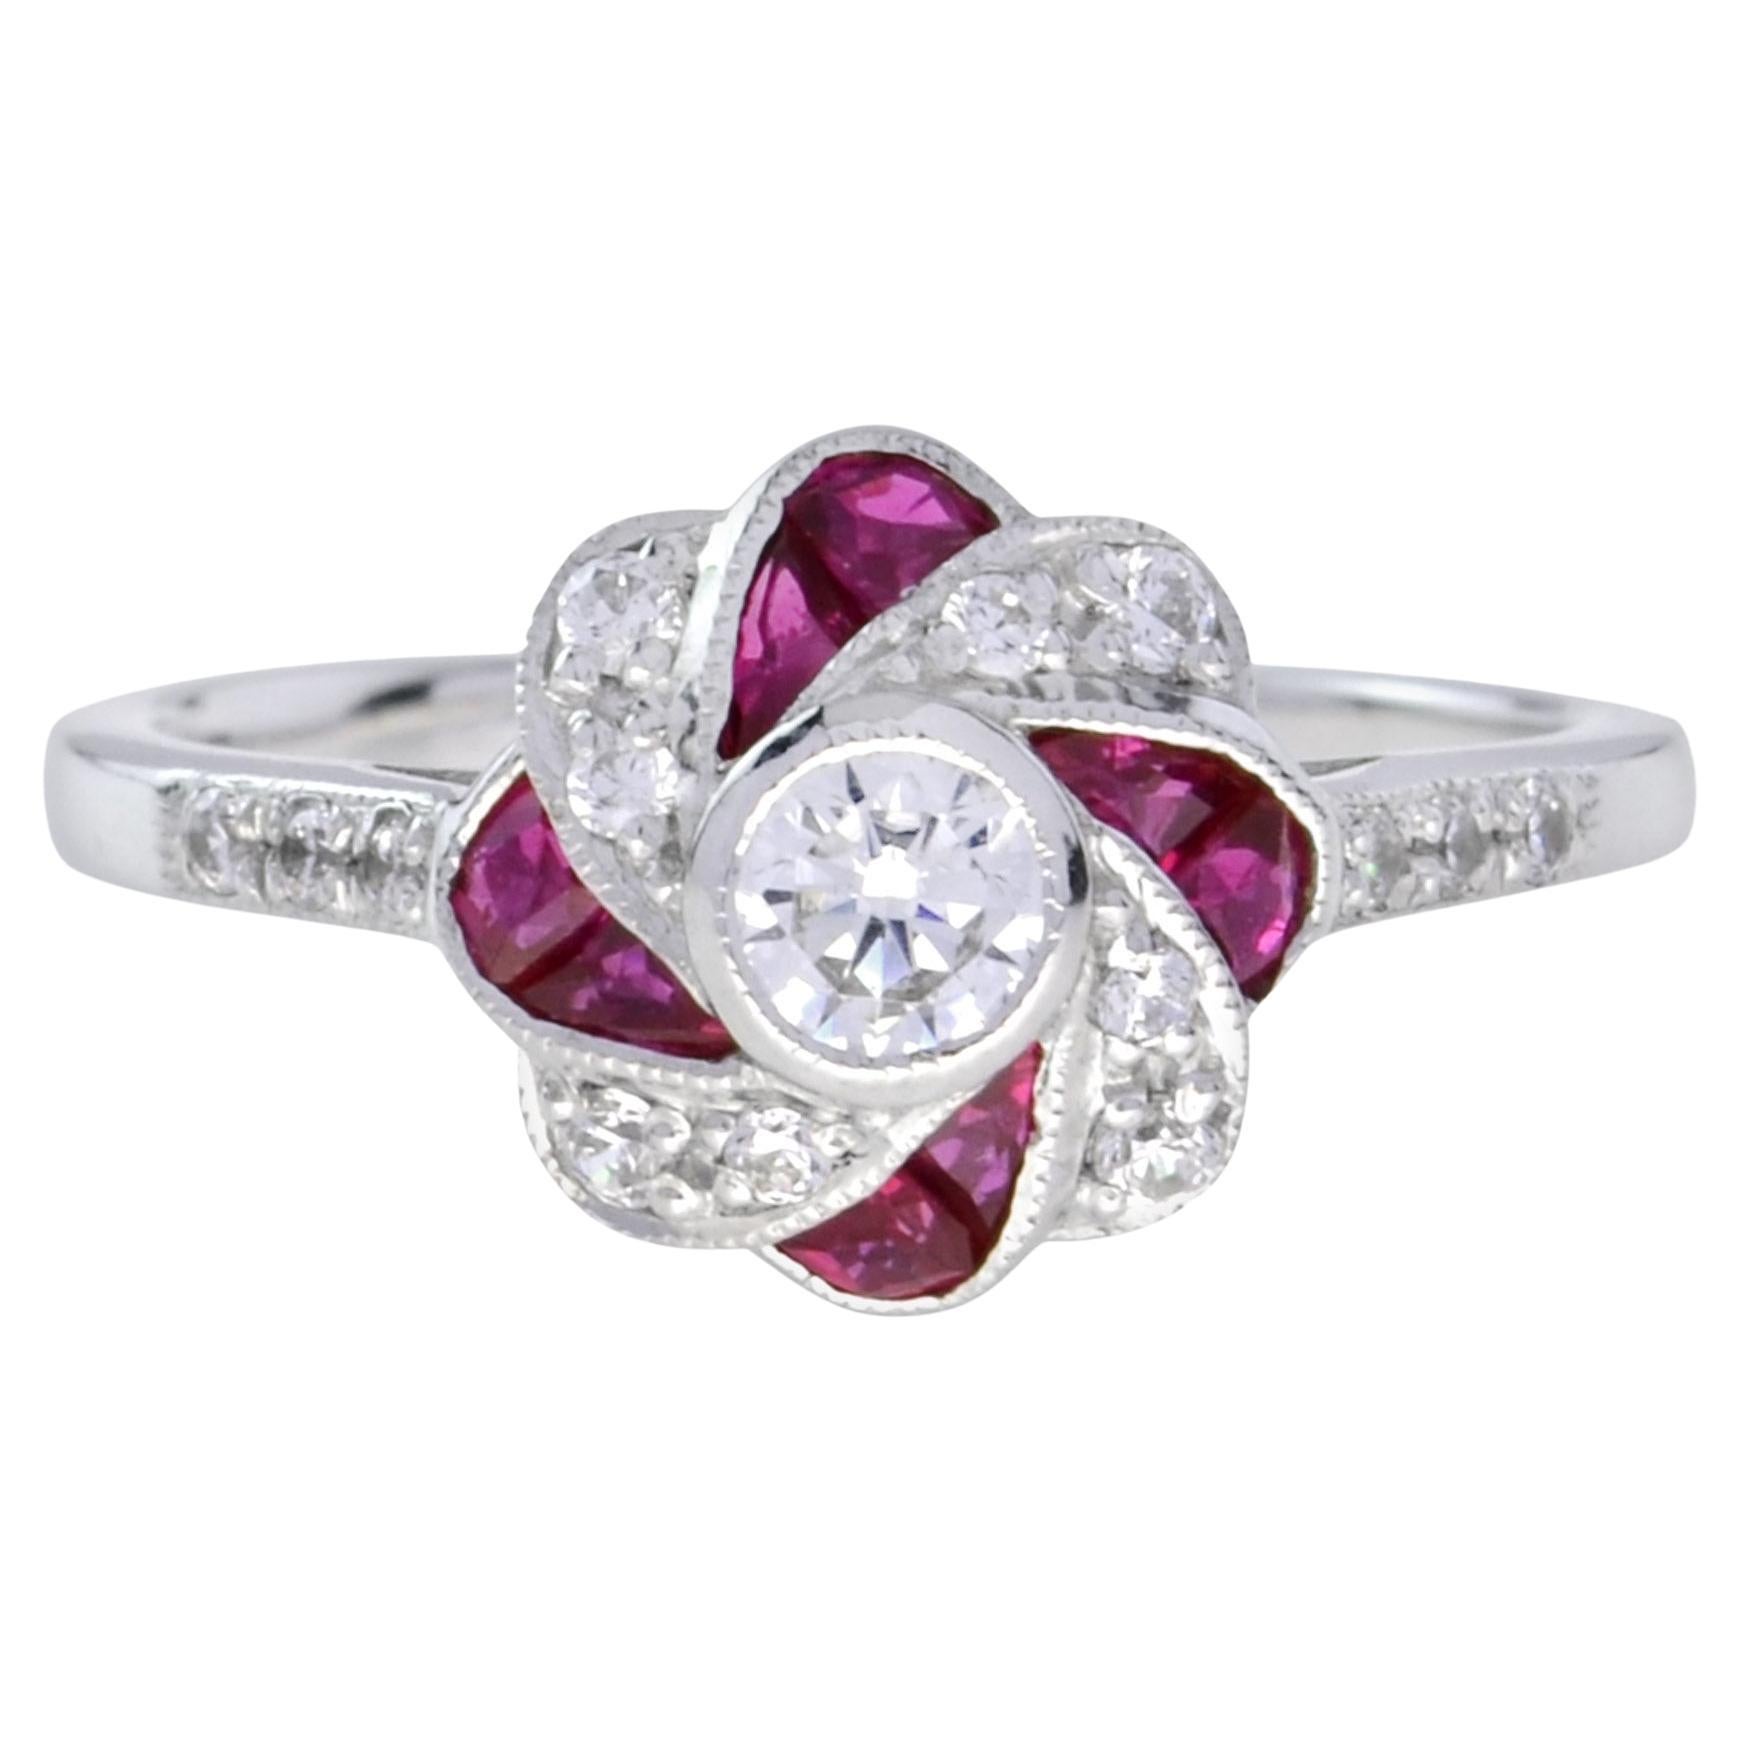 For Sale:  Art Deco Style Diamond and Ruby Floral Engagement Ring in 18K White Gold